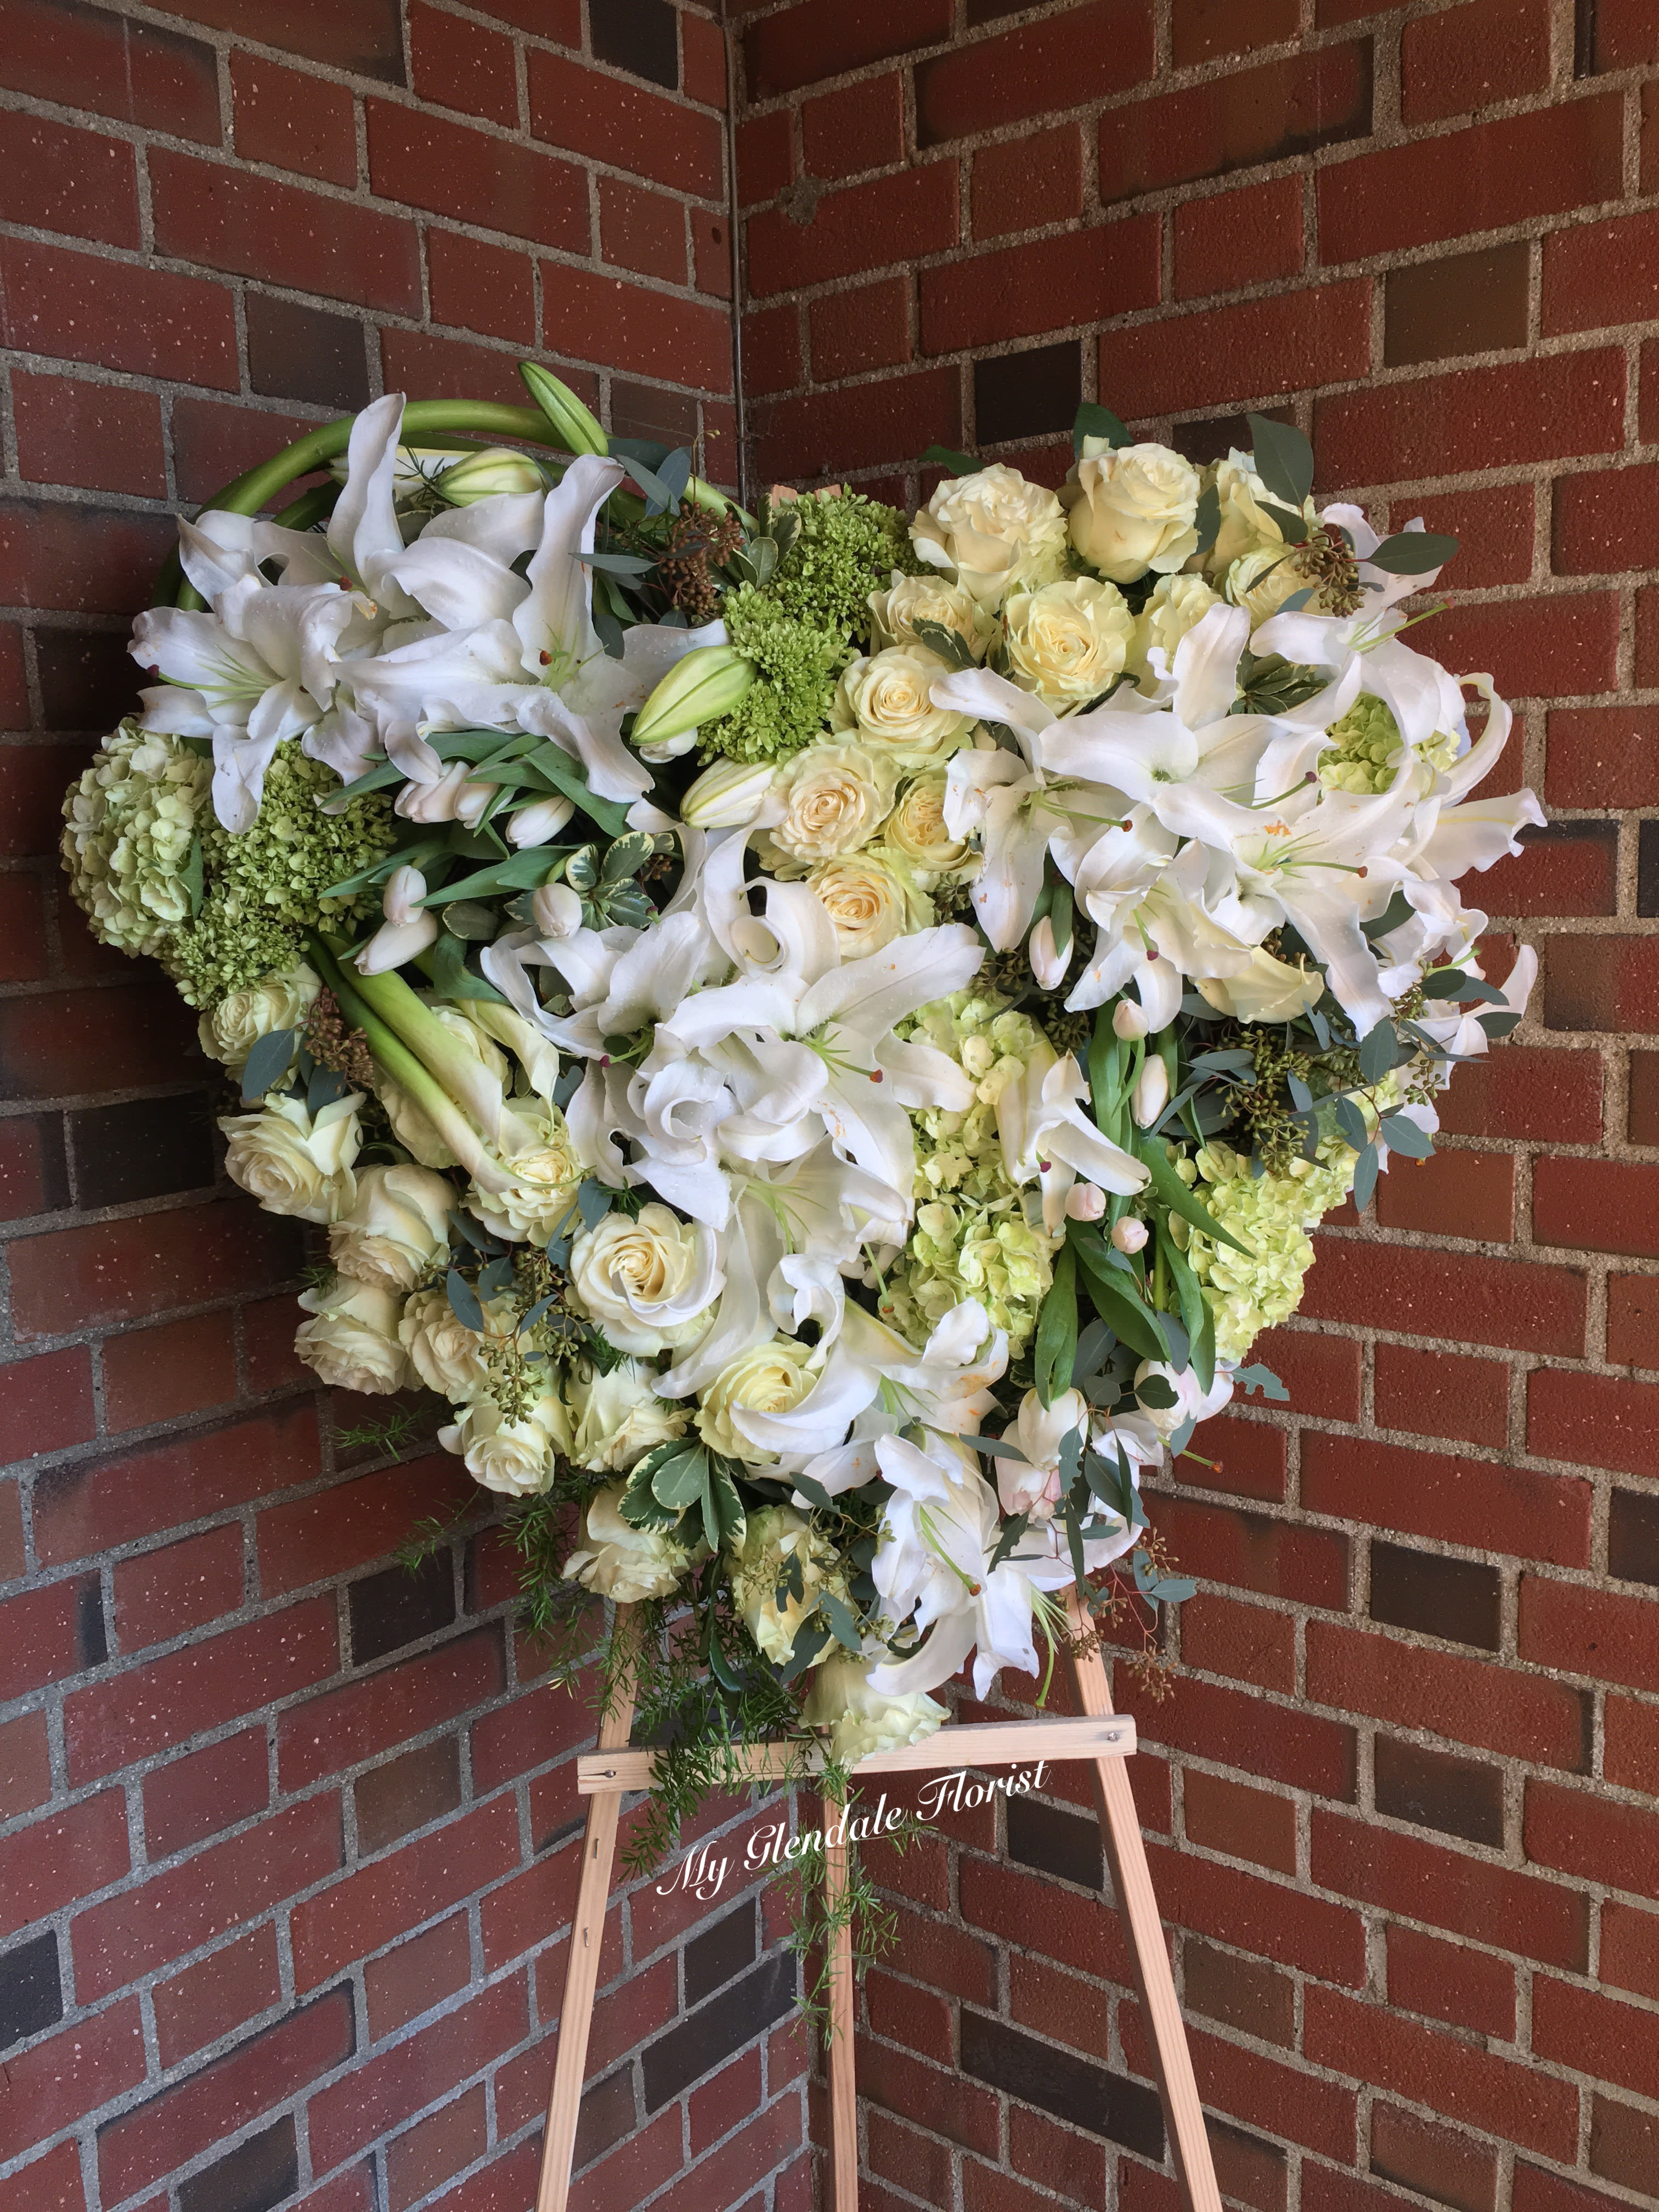 Full Heart - Funeral Service - Glendale Florist - This unique design consists of lilies, callas, roses and hydrangeas. 